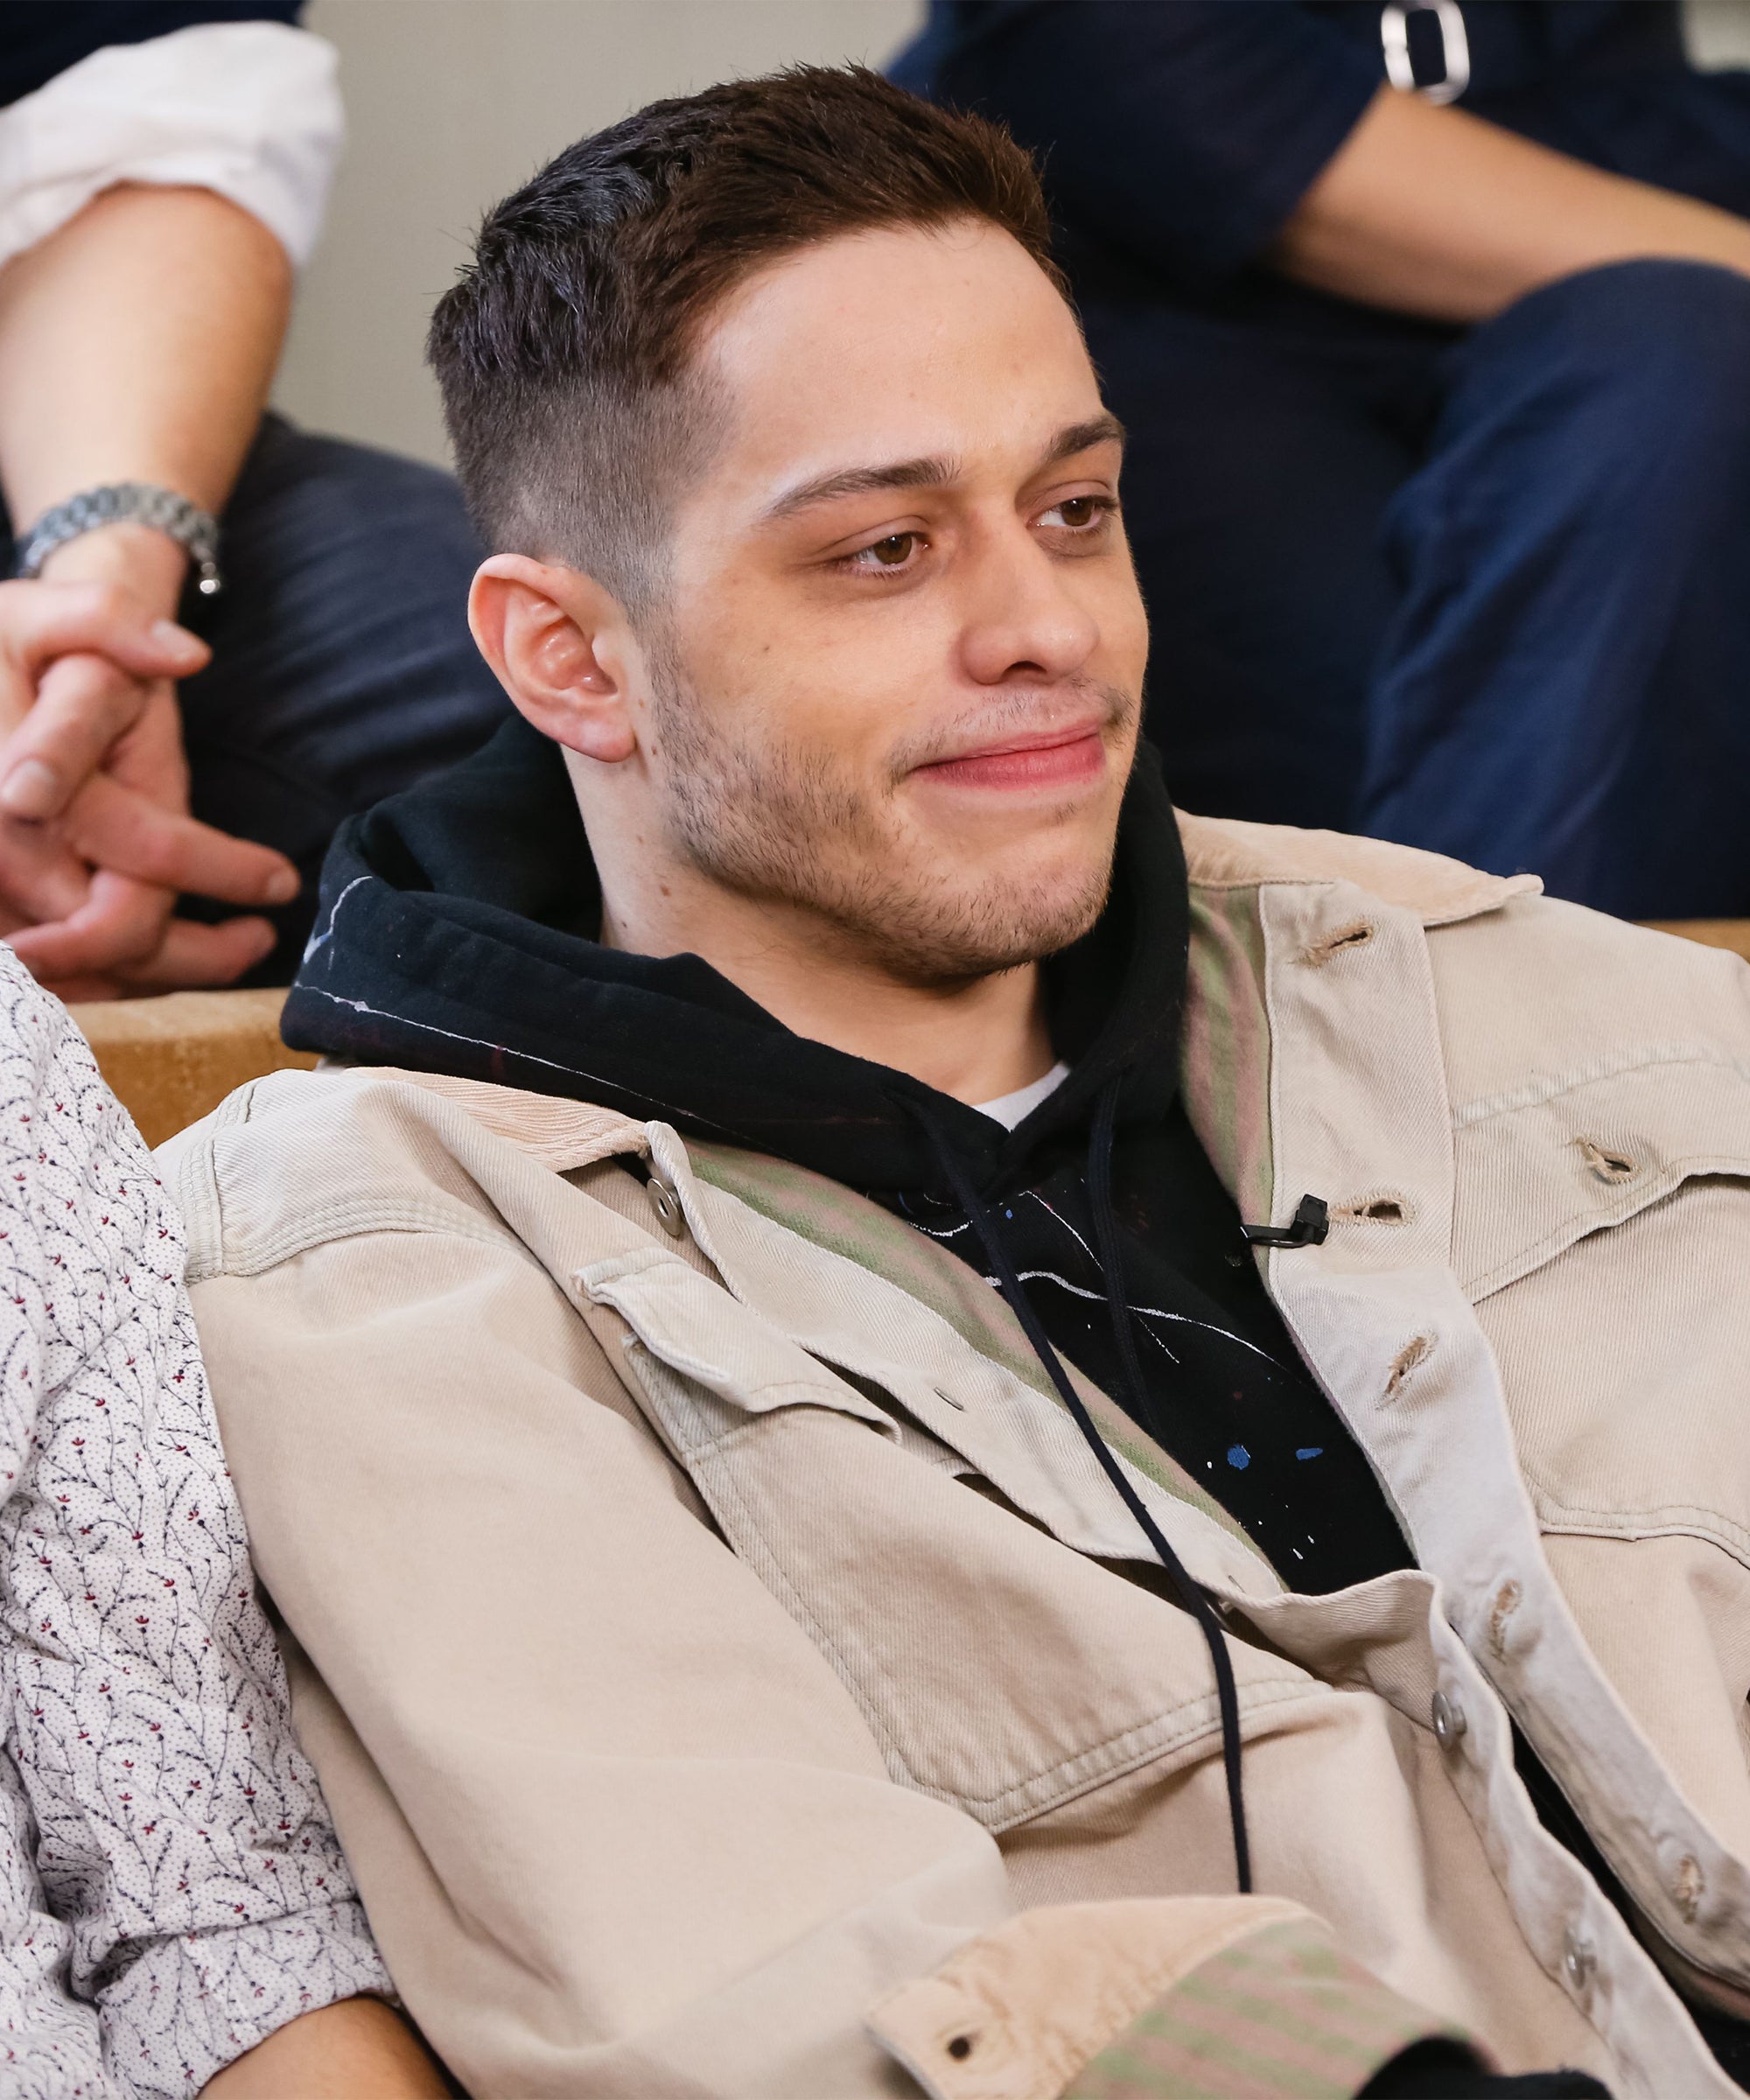 Pete Davidson Might Leave Saturday Night Live Soon